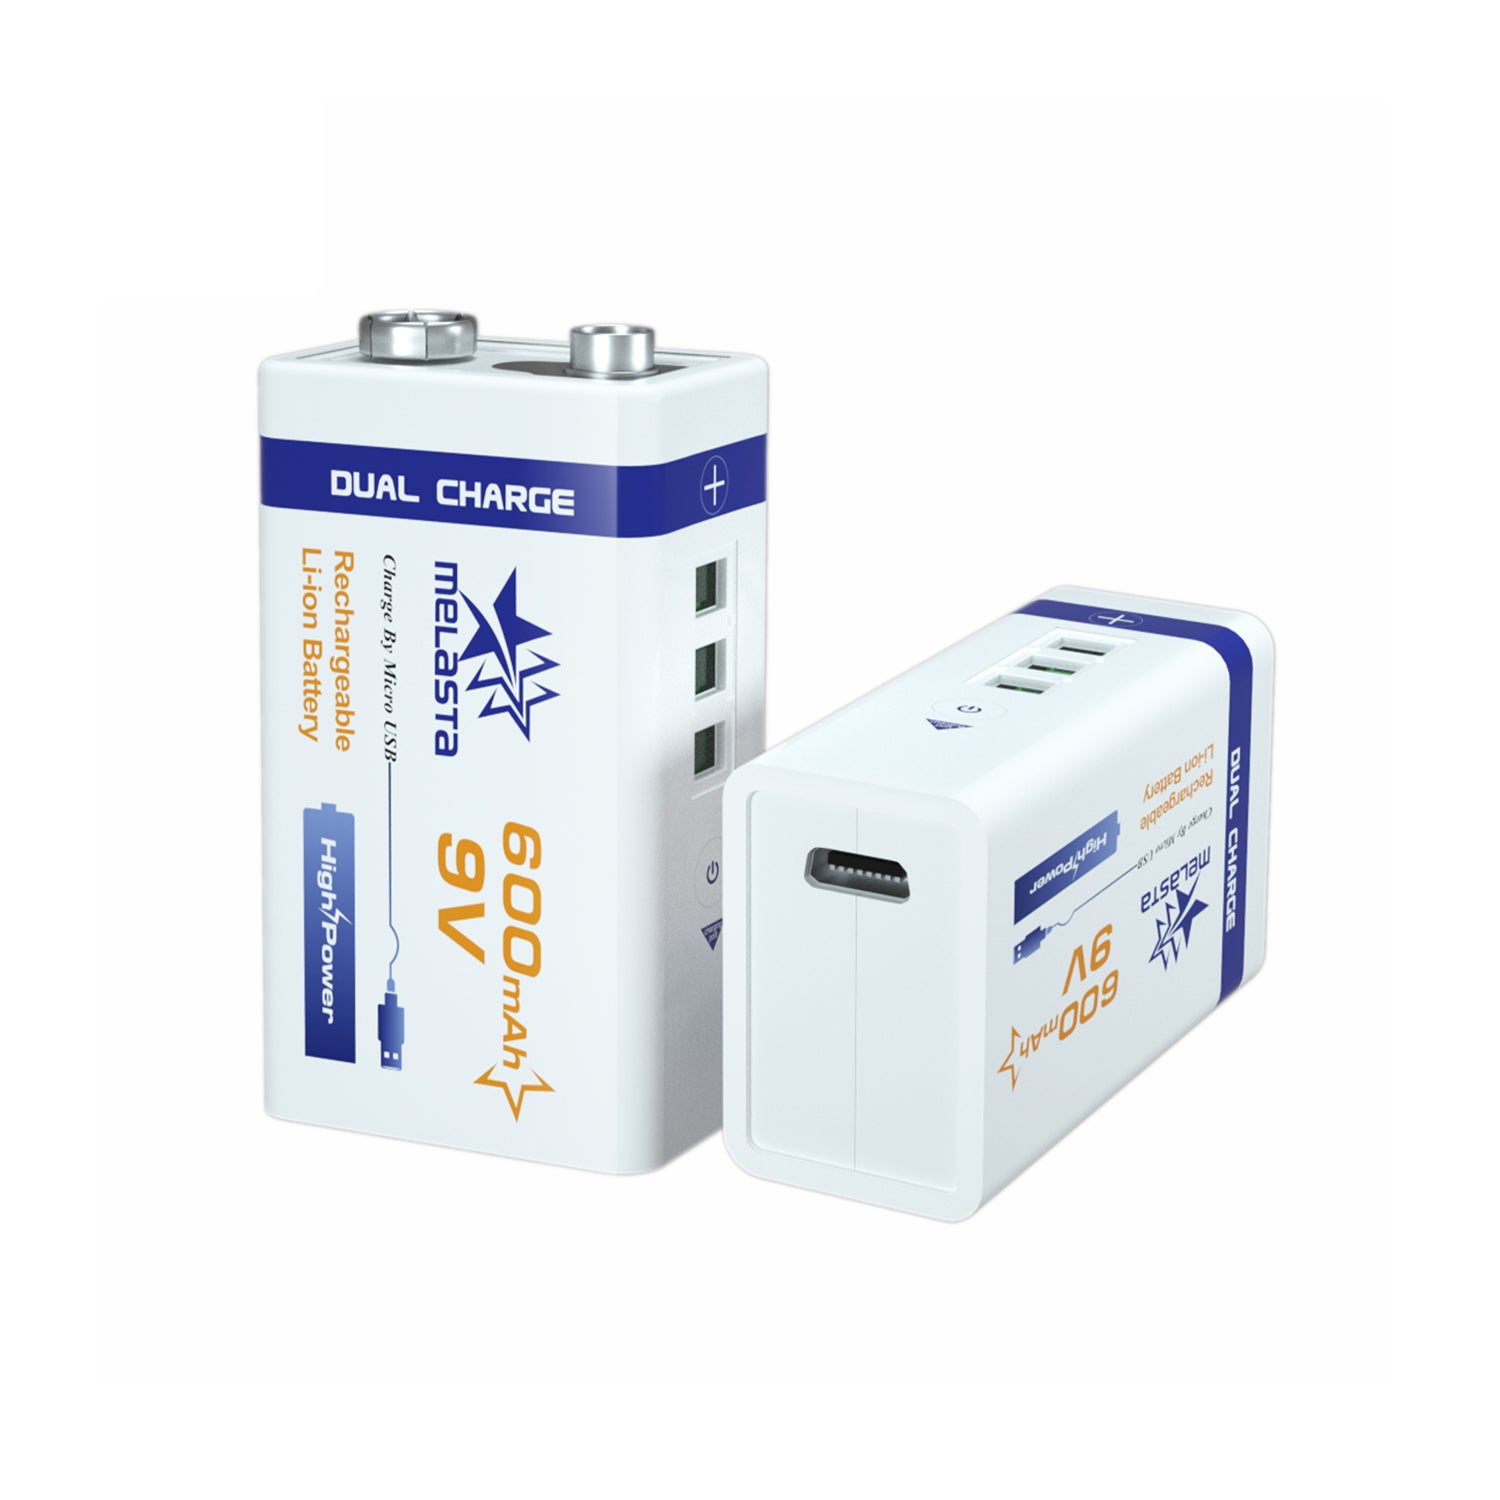 Accumulateur / Pile Rechargeable 9V - 6F22/HR22 - 8,4V~200mAh - Ni-MH.